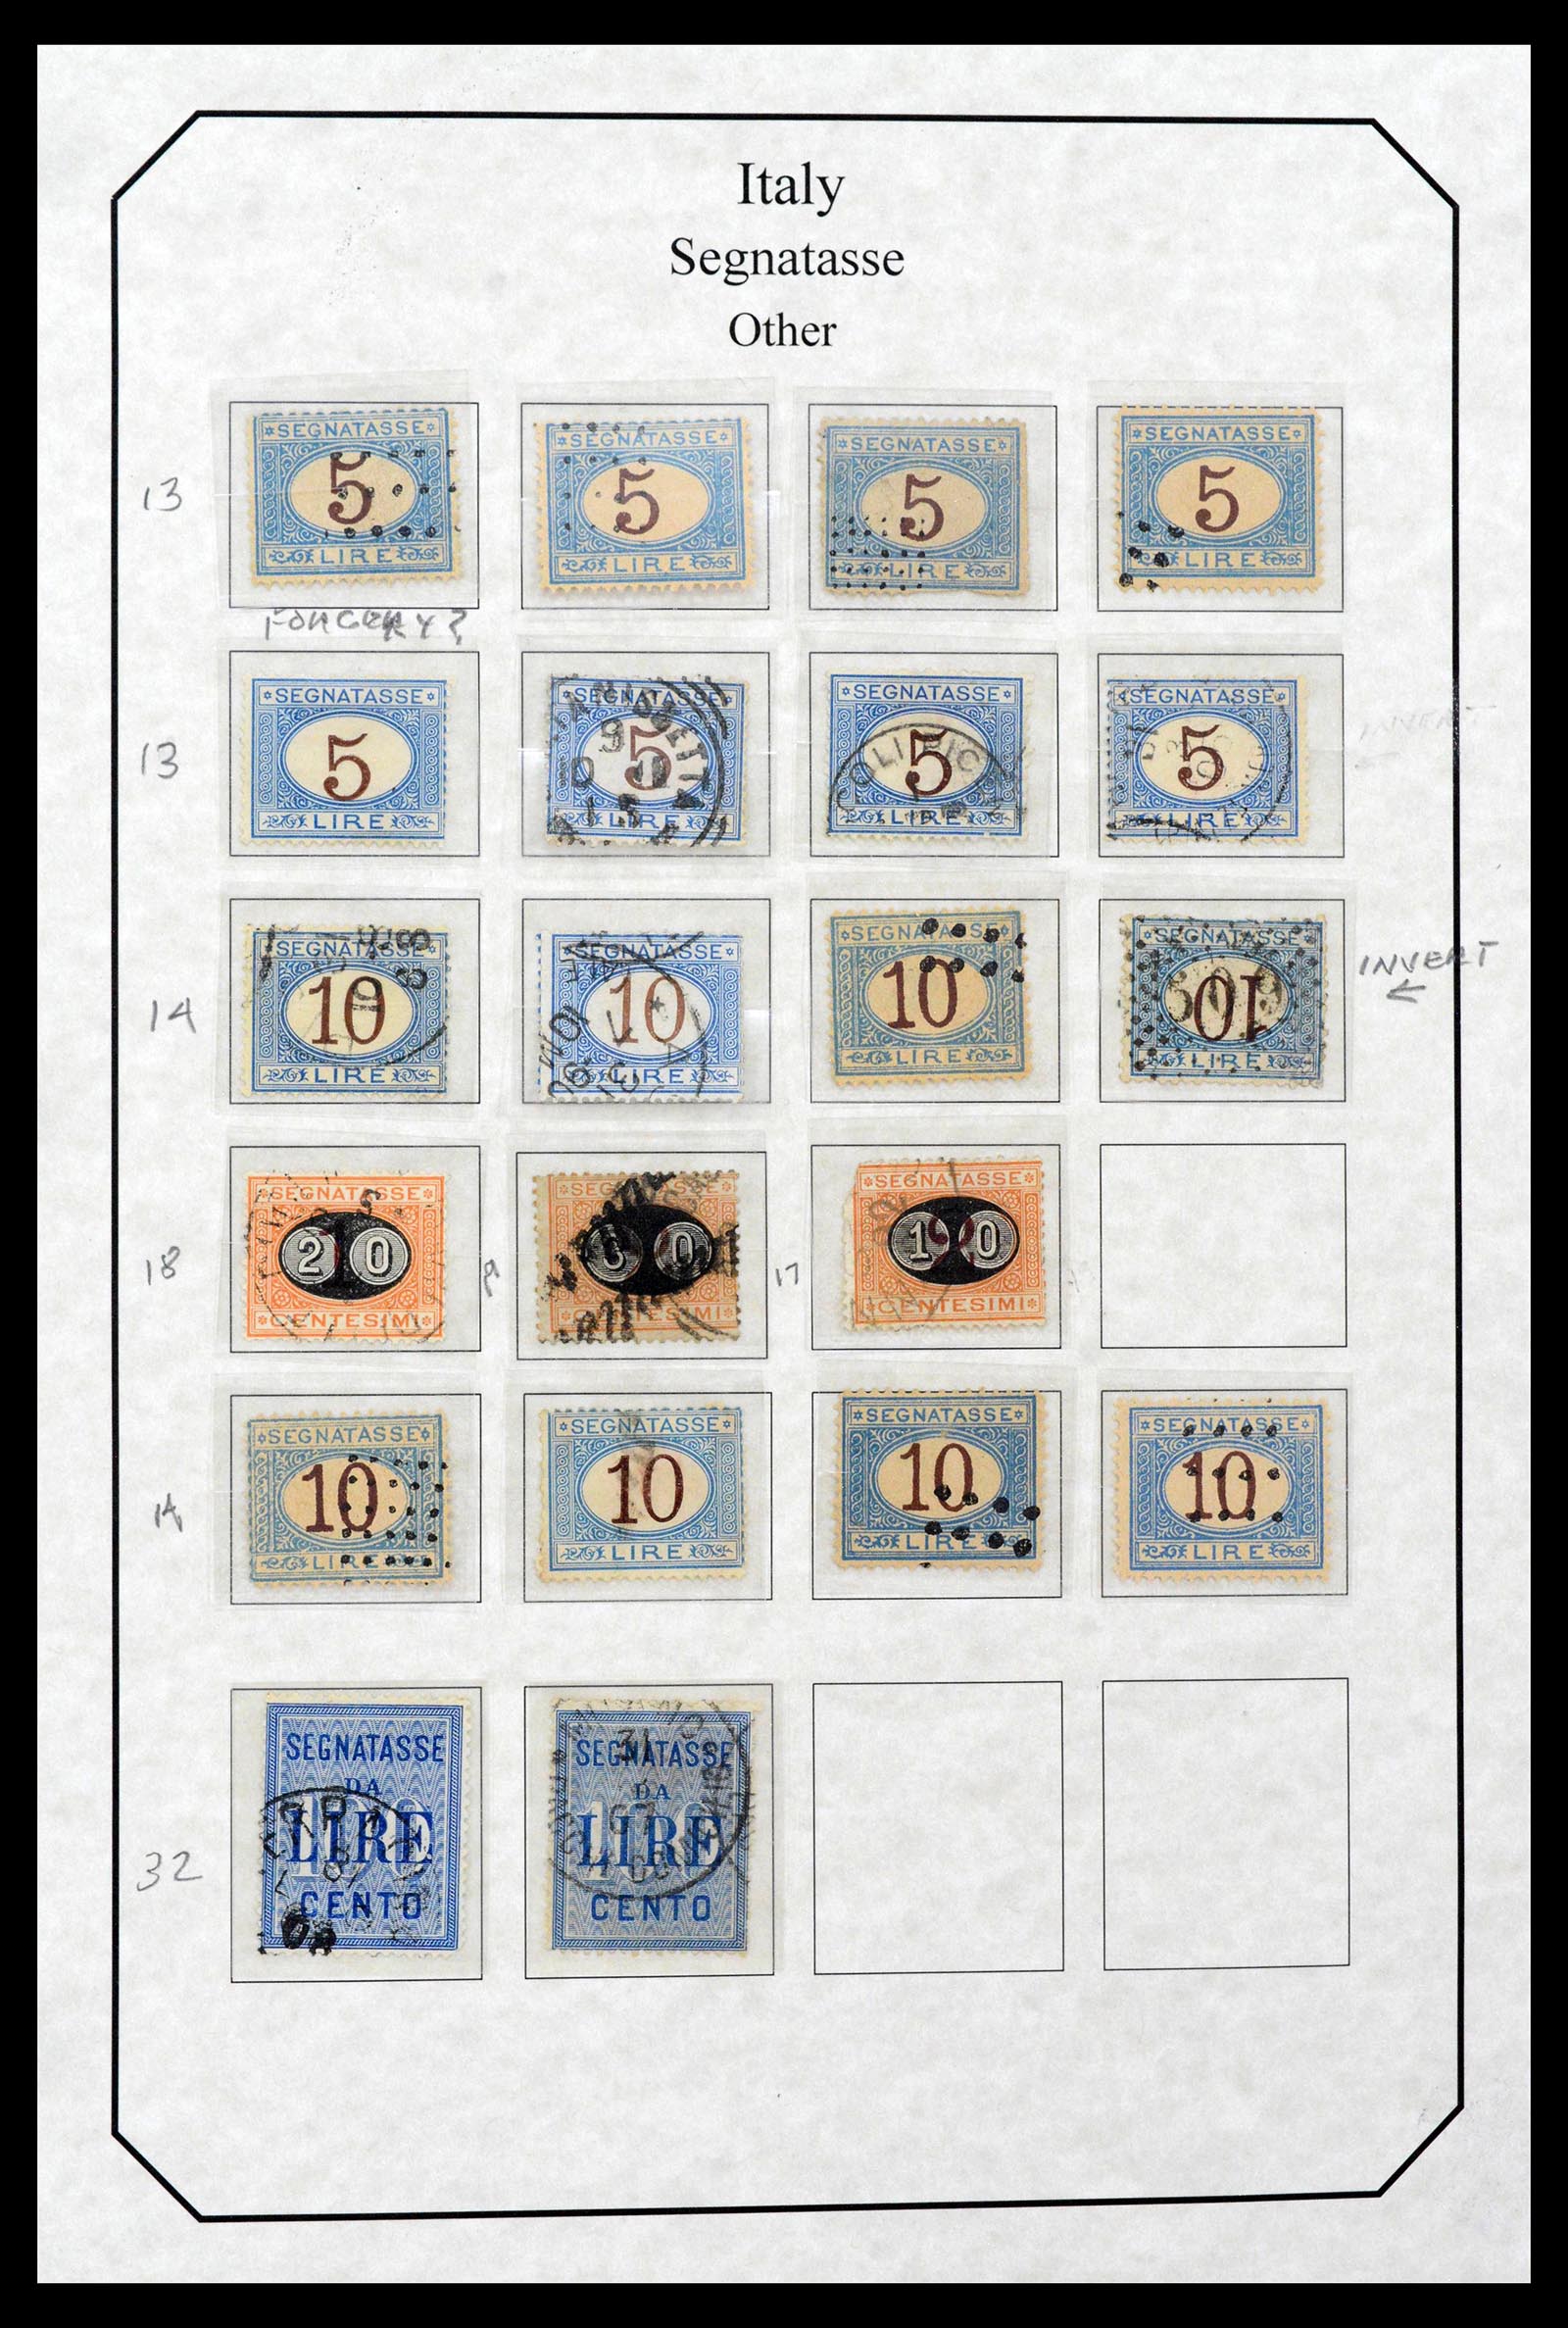 39022 0023 - Stamp collection 39022 Italy postage dues 1861-2000.